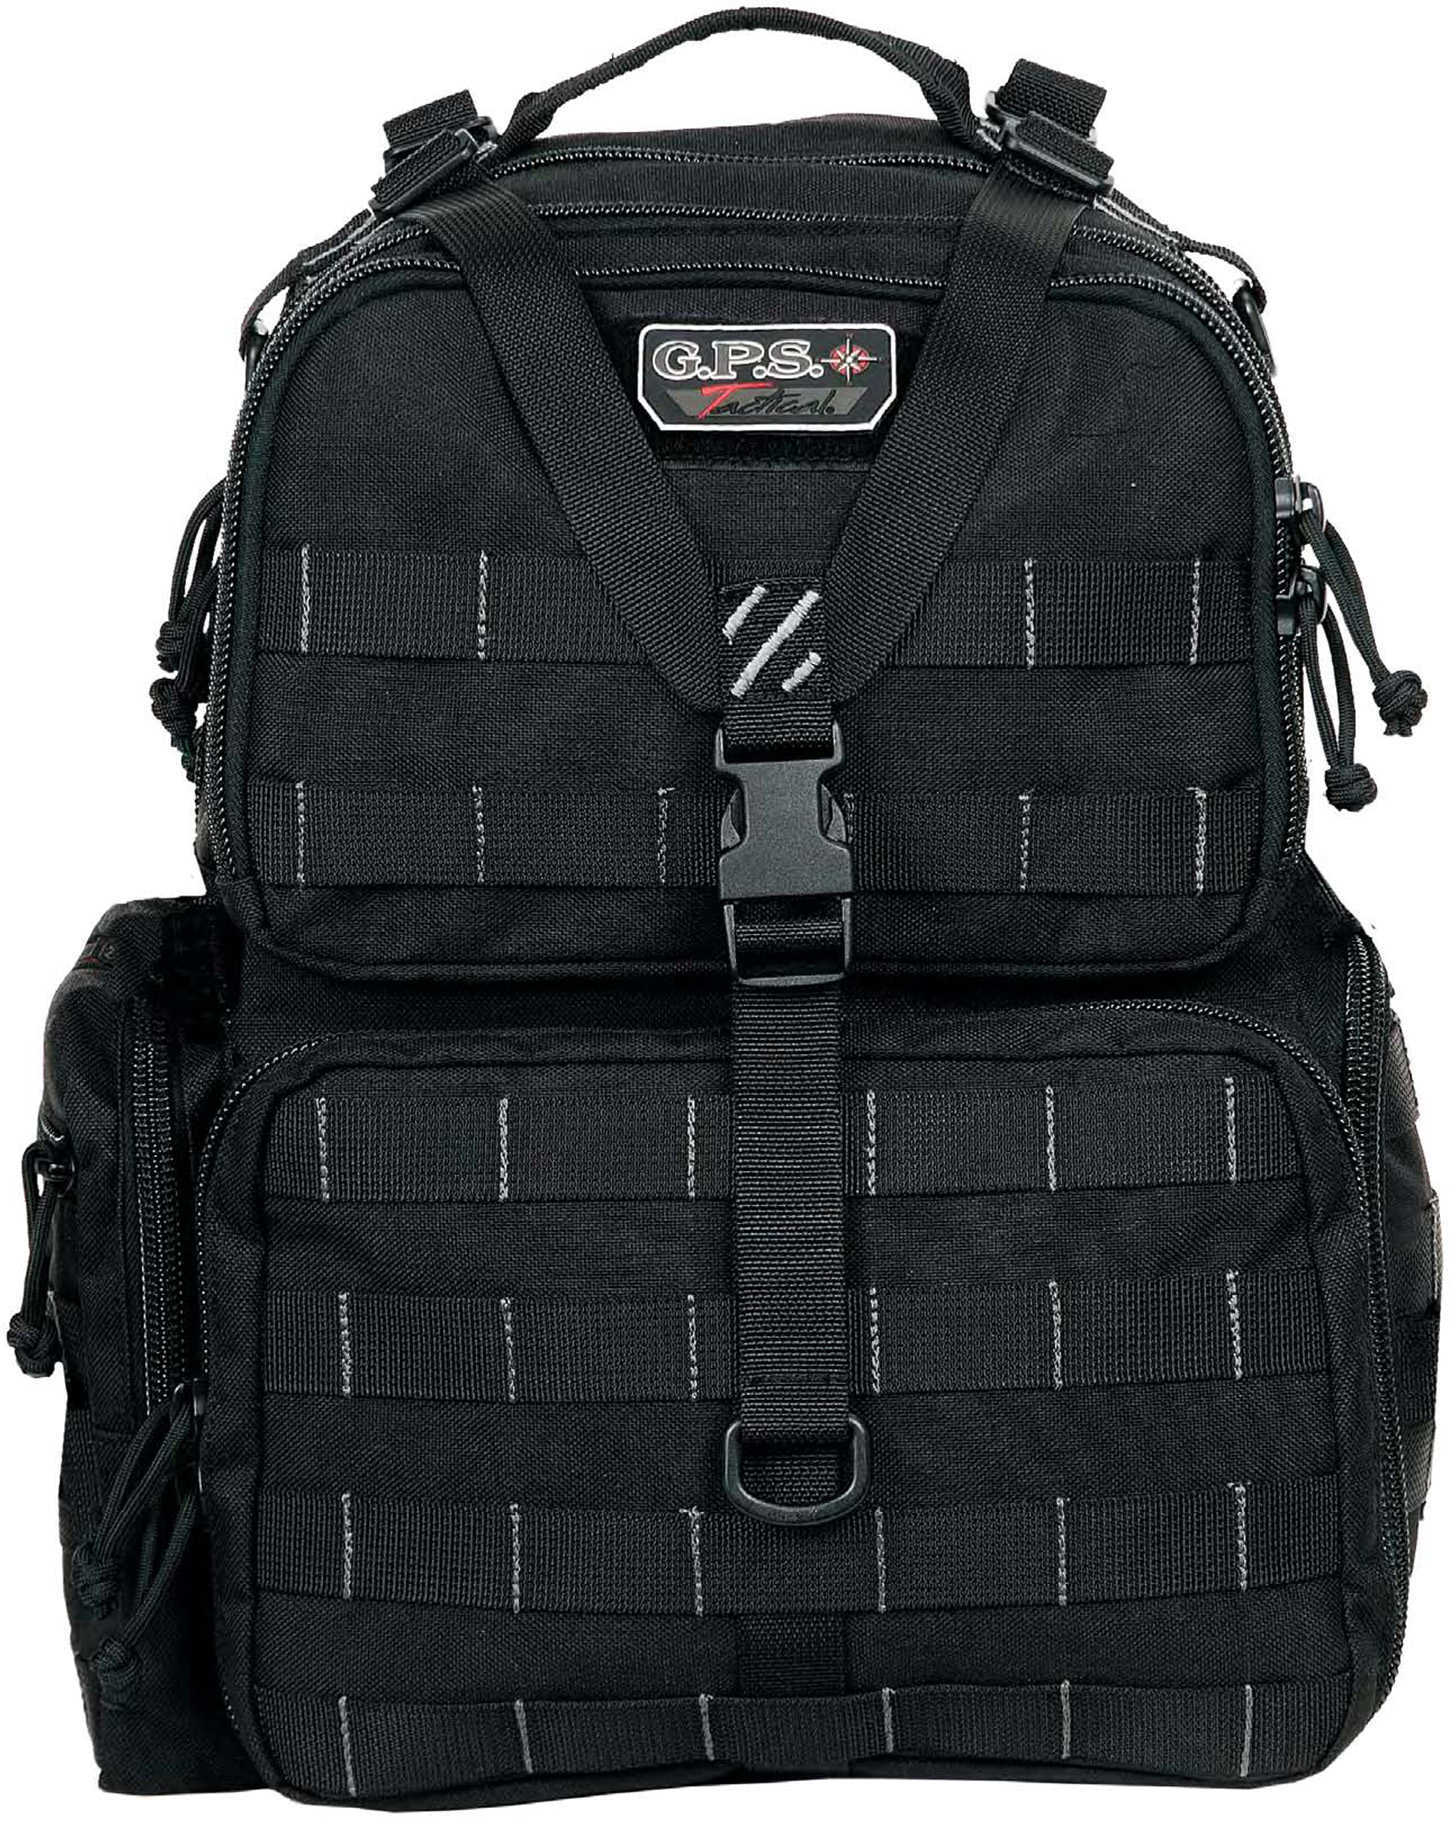 GPS TACTICL RANGE BACKPACK TALL BLK